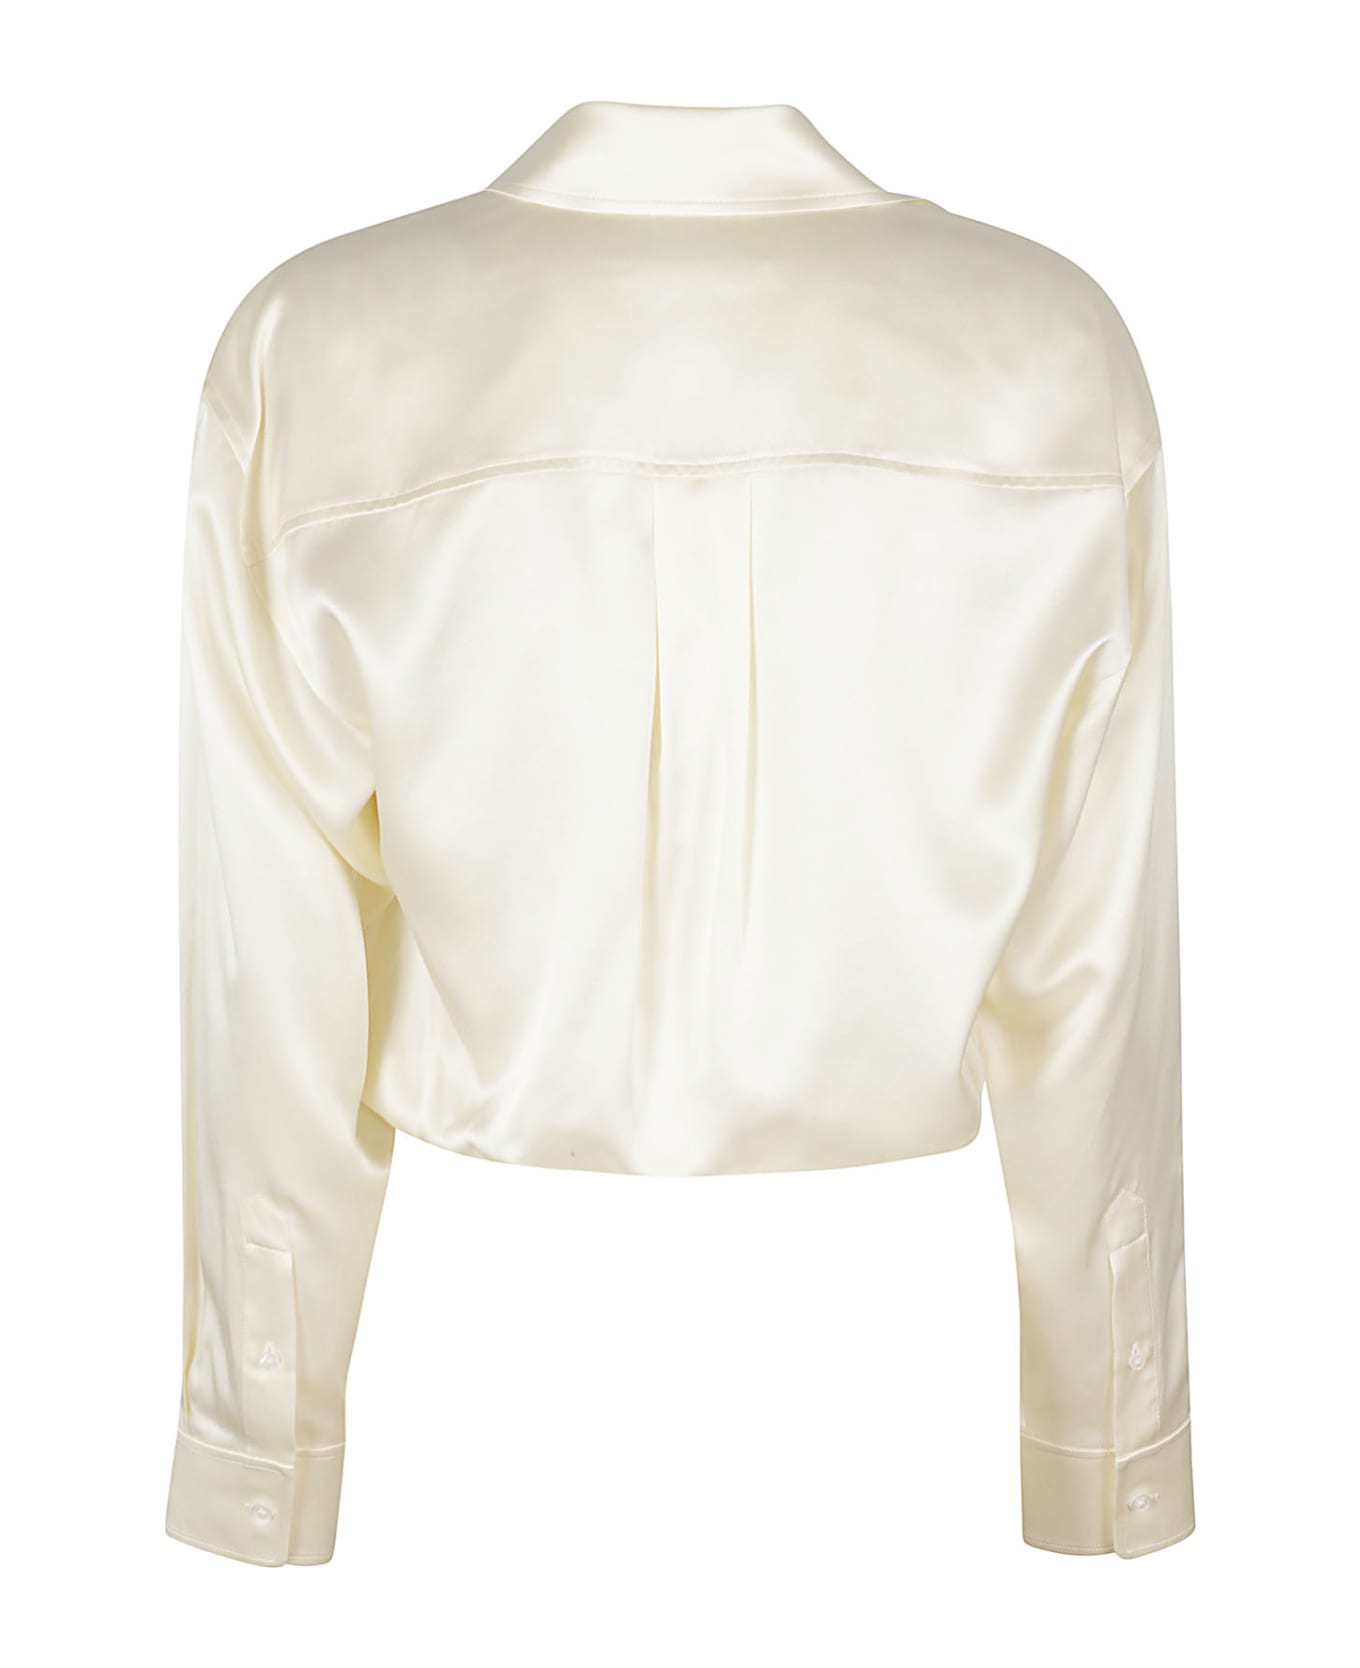 T by Alexander Wang Button Down - Ivory ブラウス